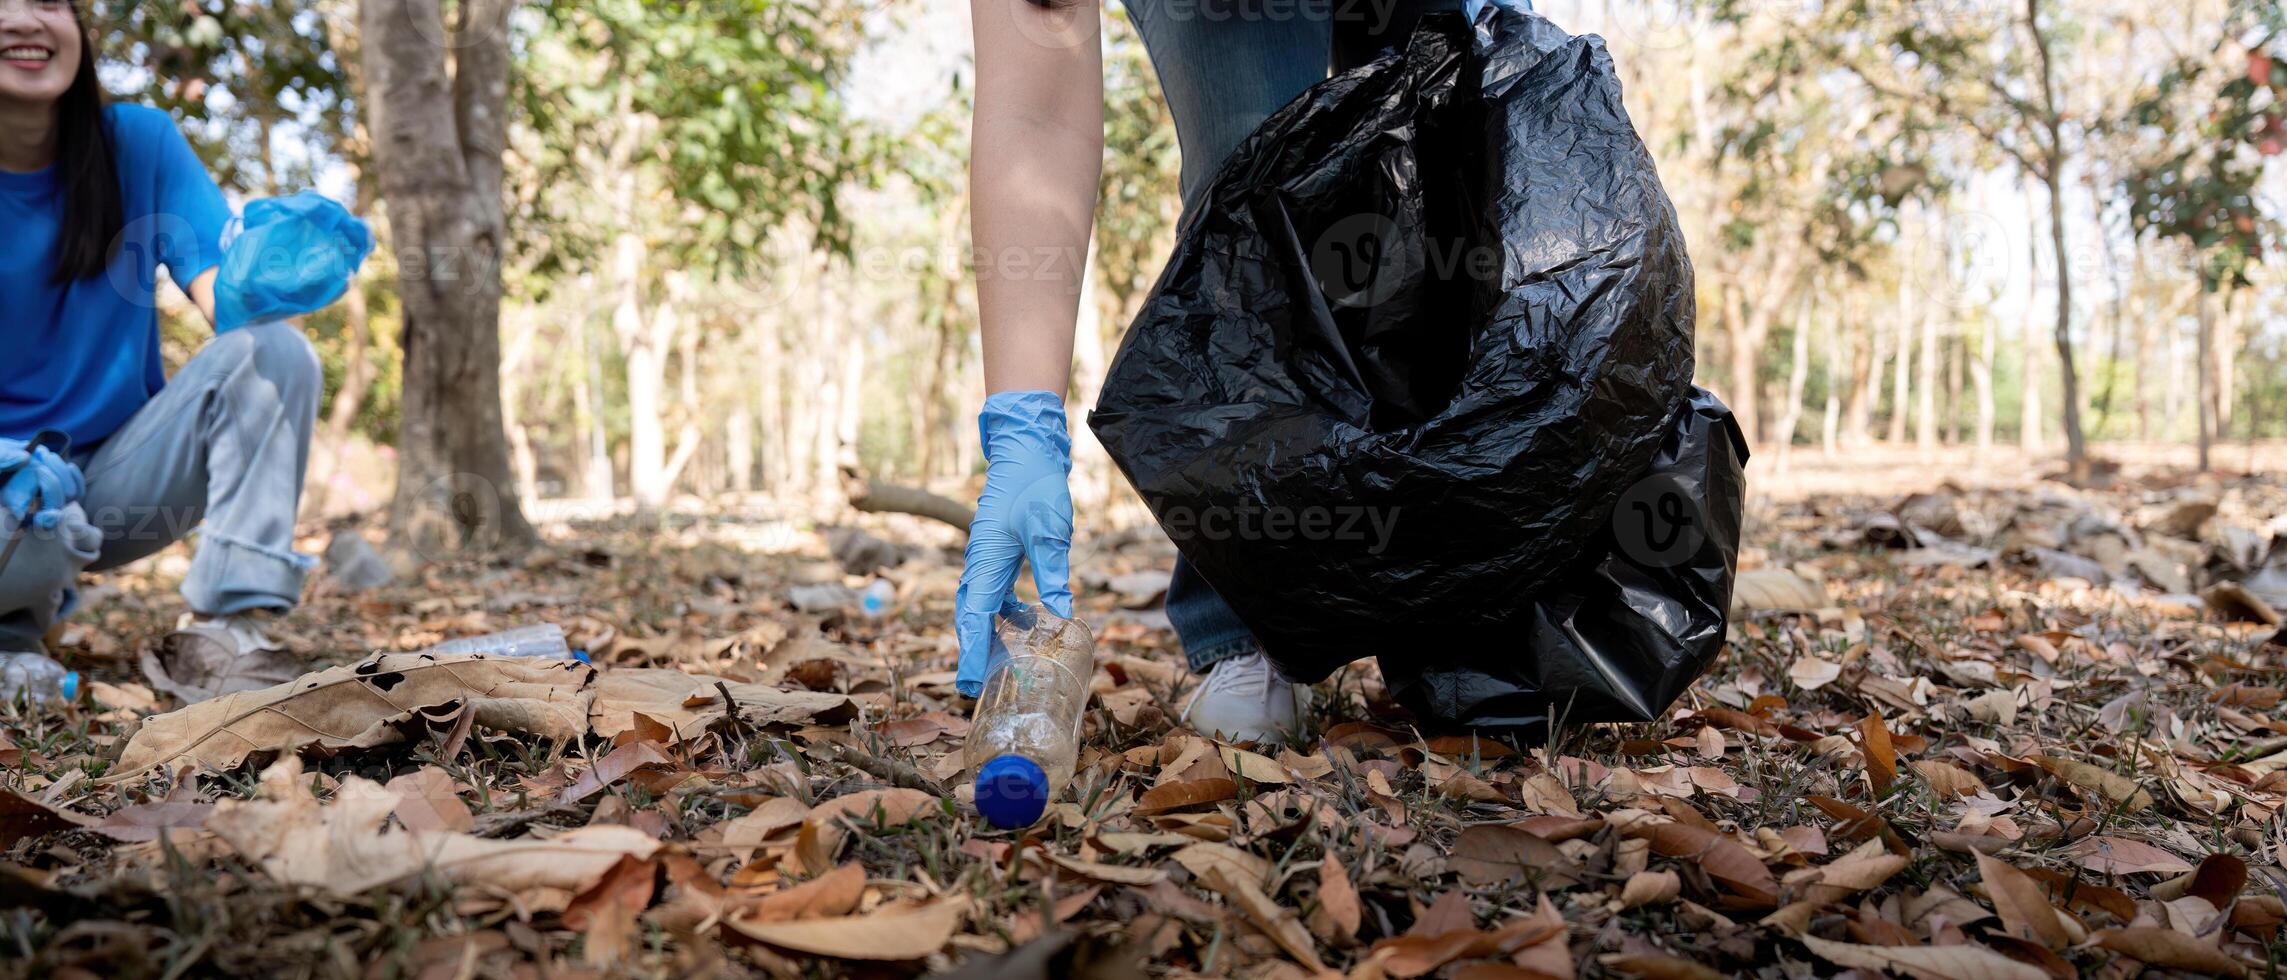 Separating waste to freshen the problem of environmental pollution and global warming, plastic waste, care for nature. Volunteer concept carrying garbage bags collecting the garbage photo